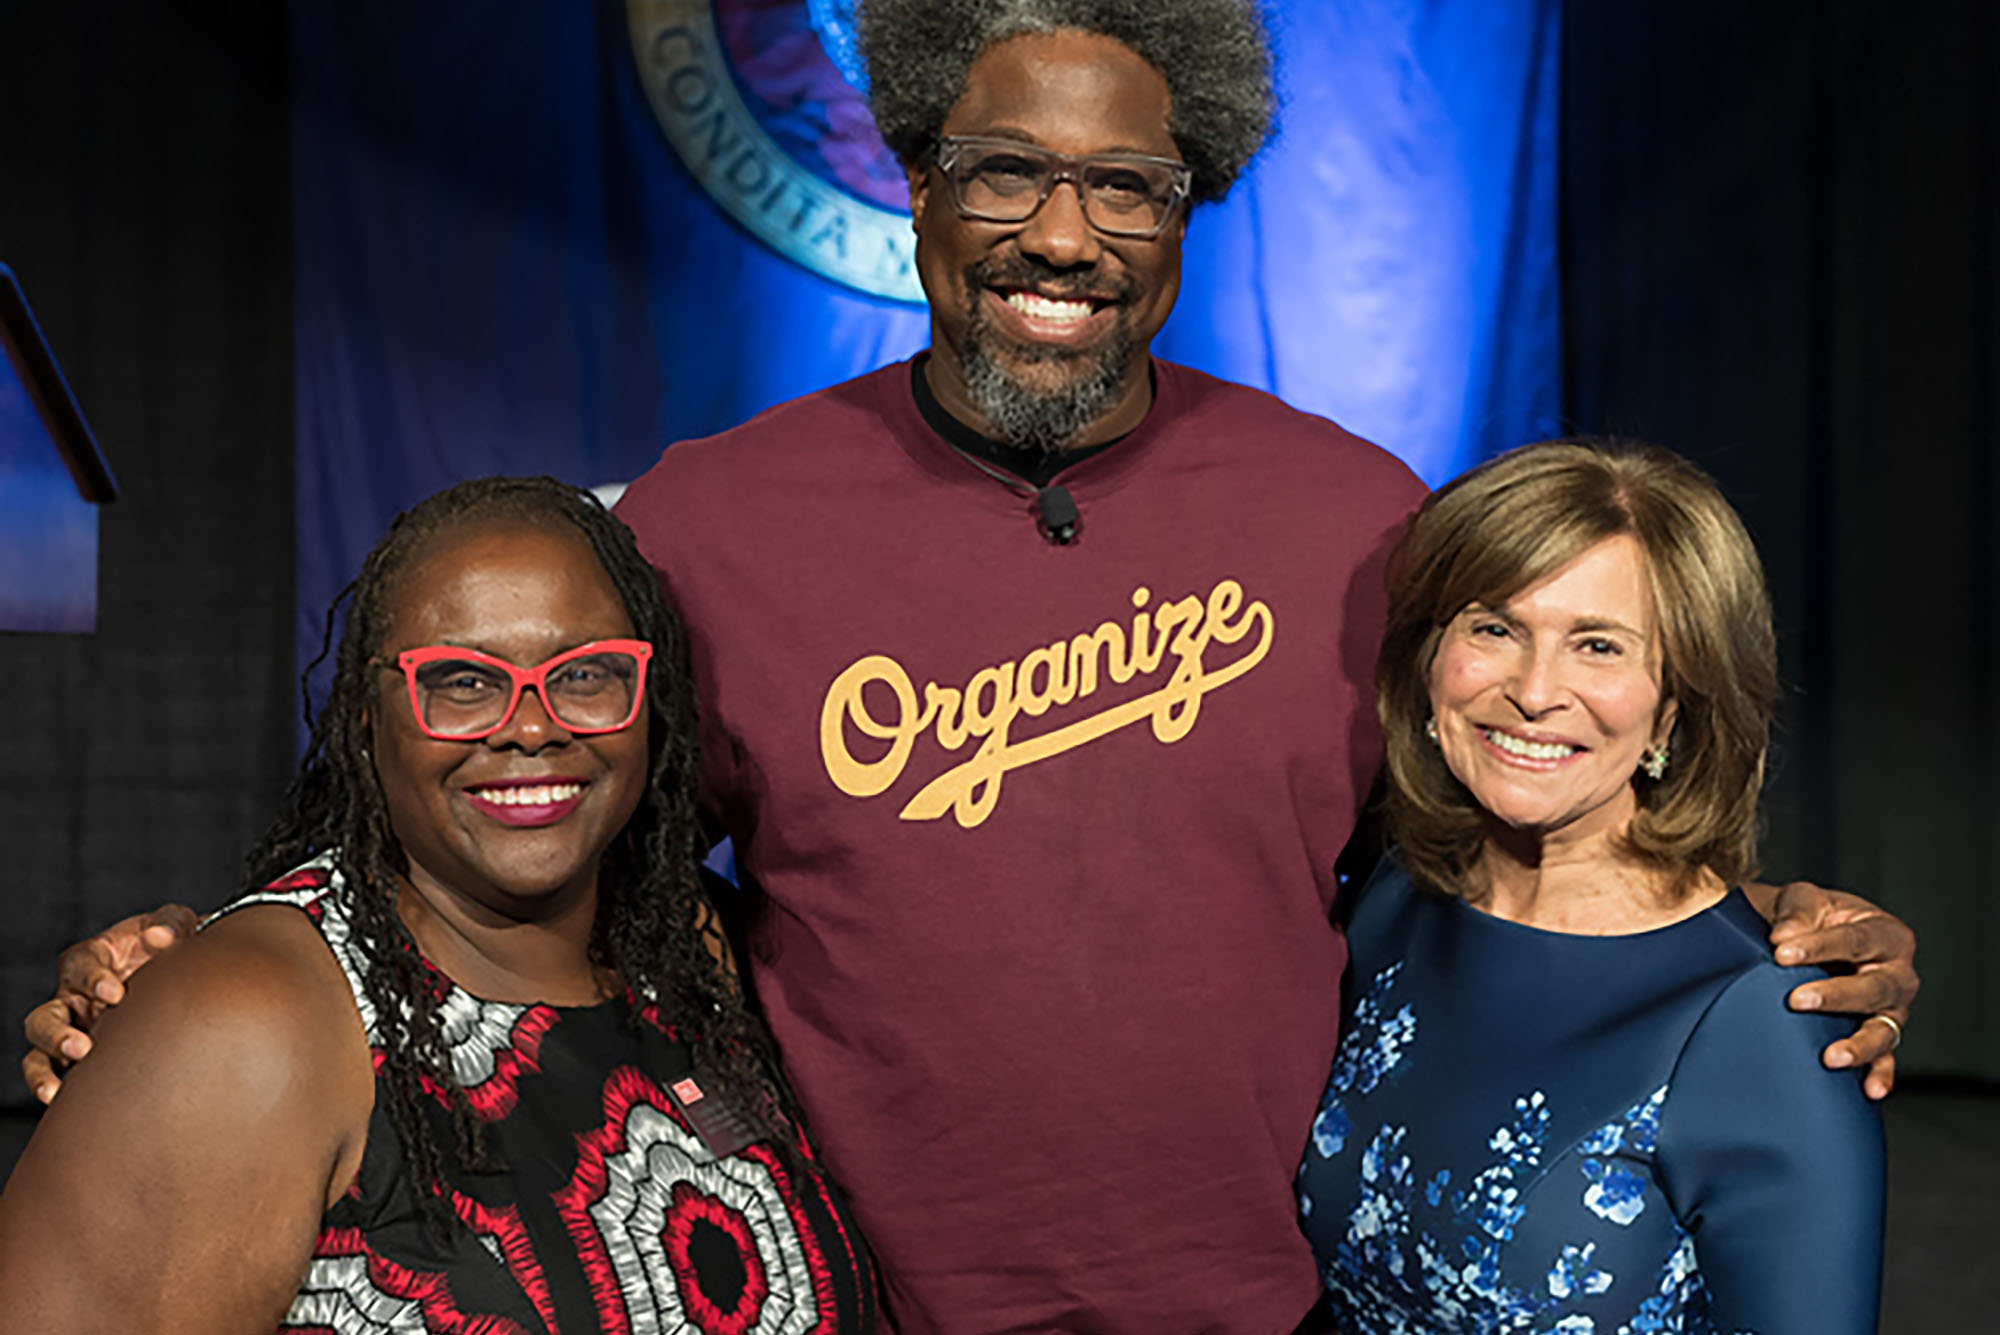 Photo: Dean Onwuachi-Willig (left) with W. Kamau Bell (center), and Rikki Klieman. A tall black man with graying bear and afro poses for a photo with arms over the shoulders of two women. On the left, a shorter black woman with long dreads, large red glasses, and a black and red dress smiles and on the right a shorter white woman with shoulder length brown hair and blue dress smiles.